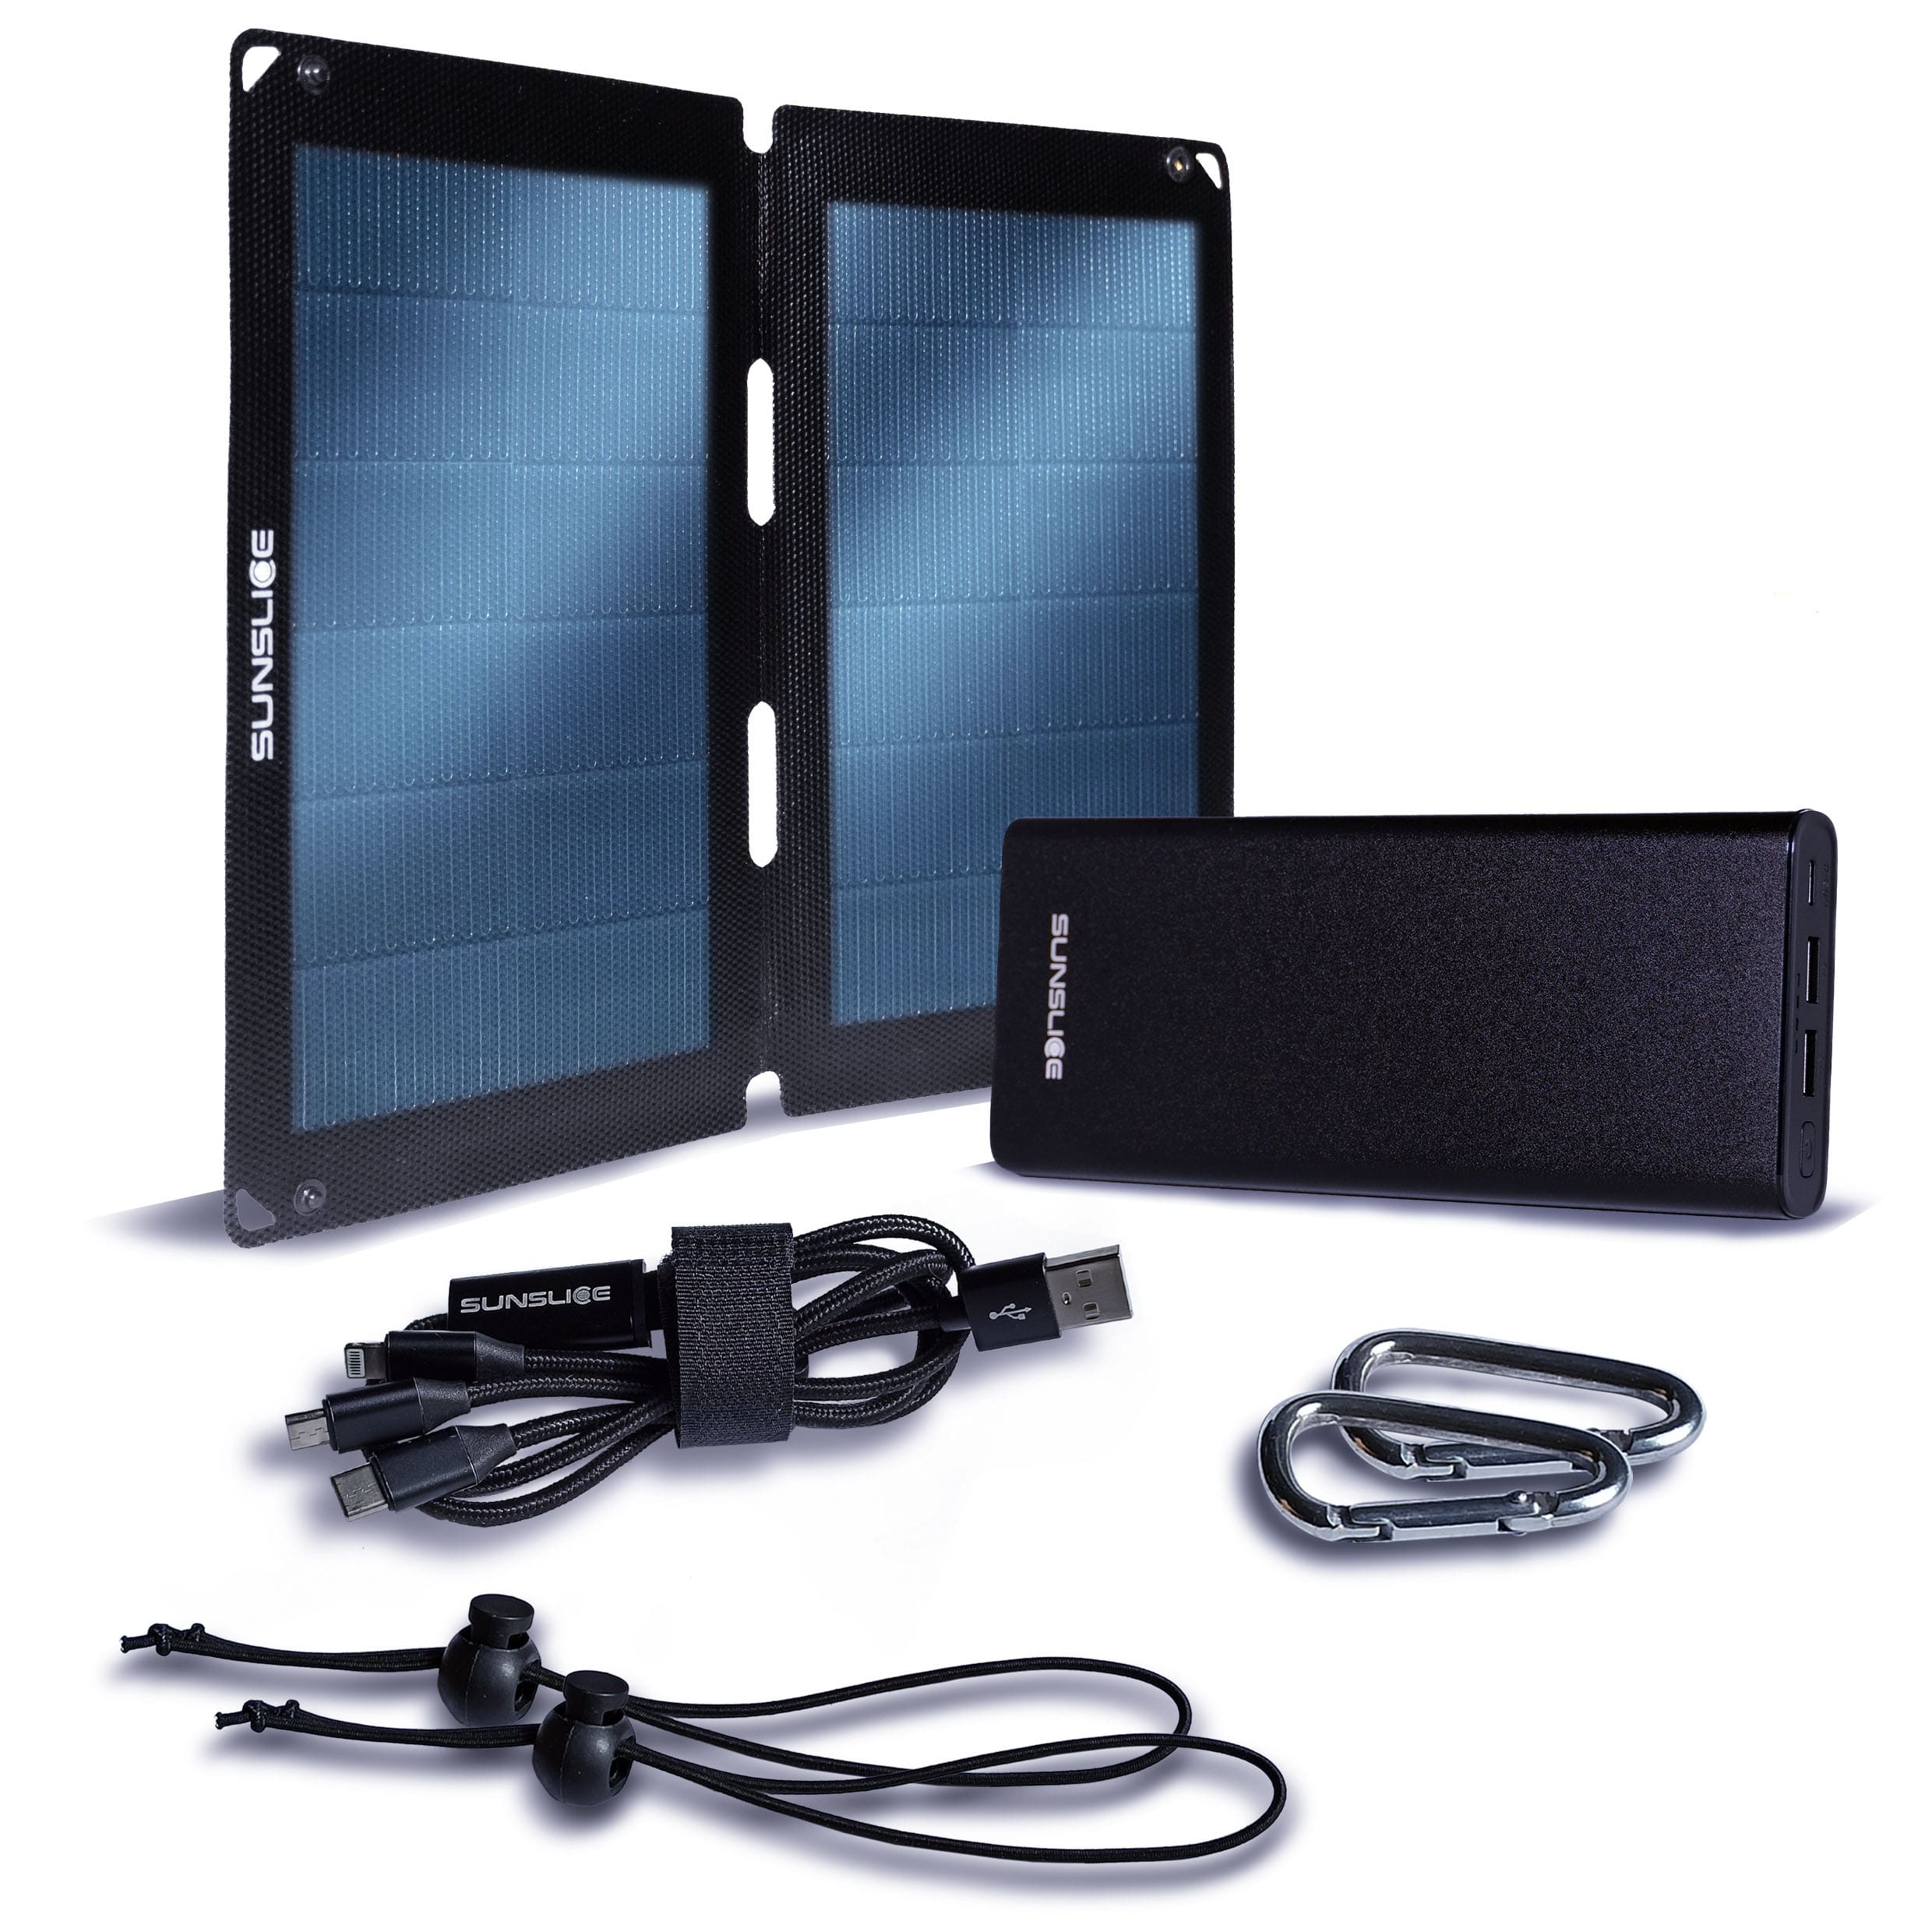 Kit with a solar panel fusion flex 12 and a Gravity 100 power bank for laptop + 2 carabiner , 2 elastic band, 1 trident cable